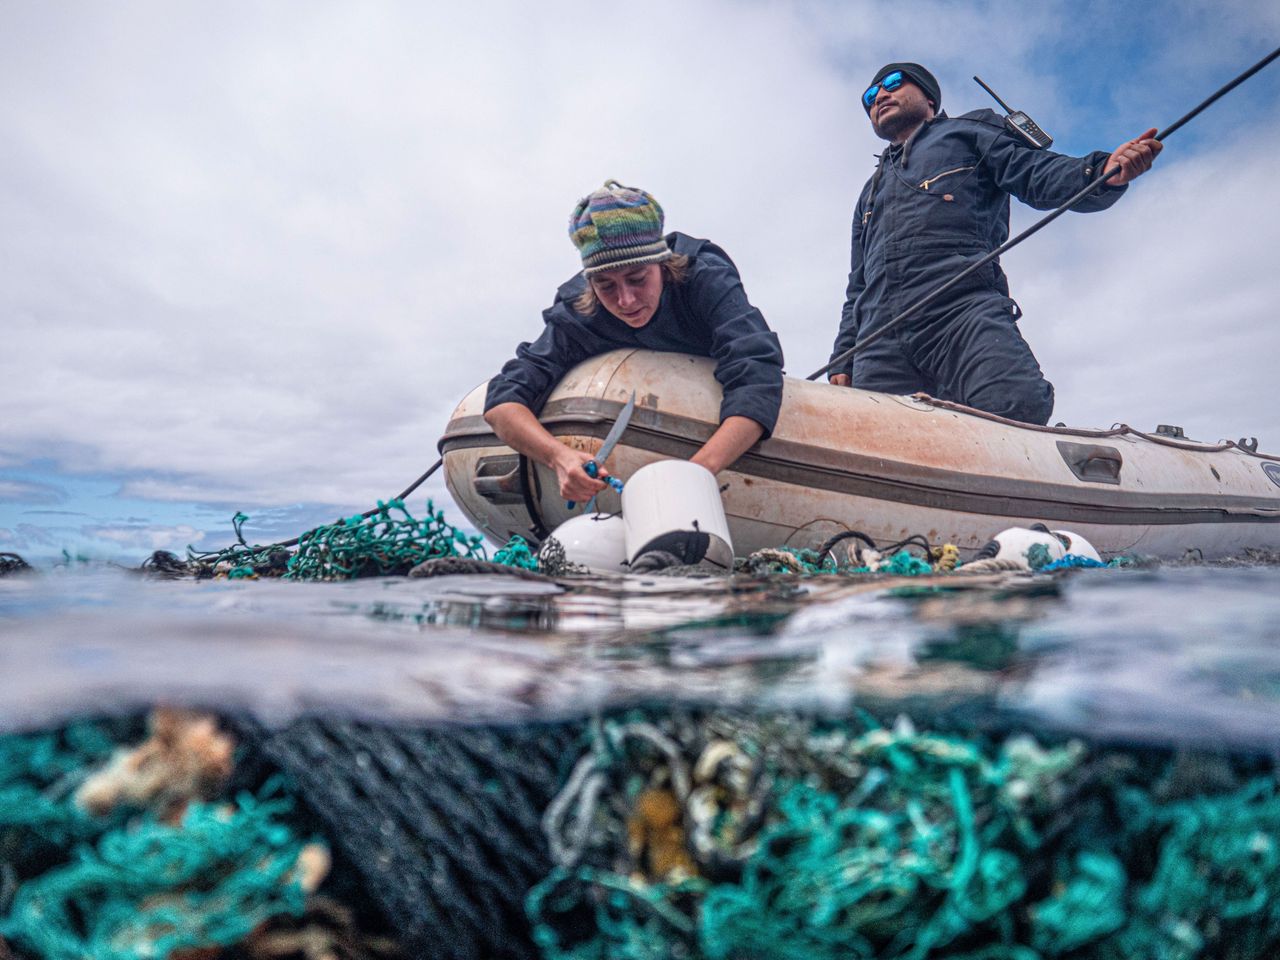 The Ocean Voyages Institute has been working to clean up the Great Pacific Garbage Patch for over a decade.